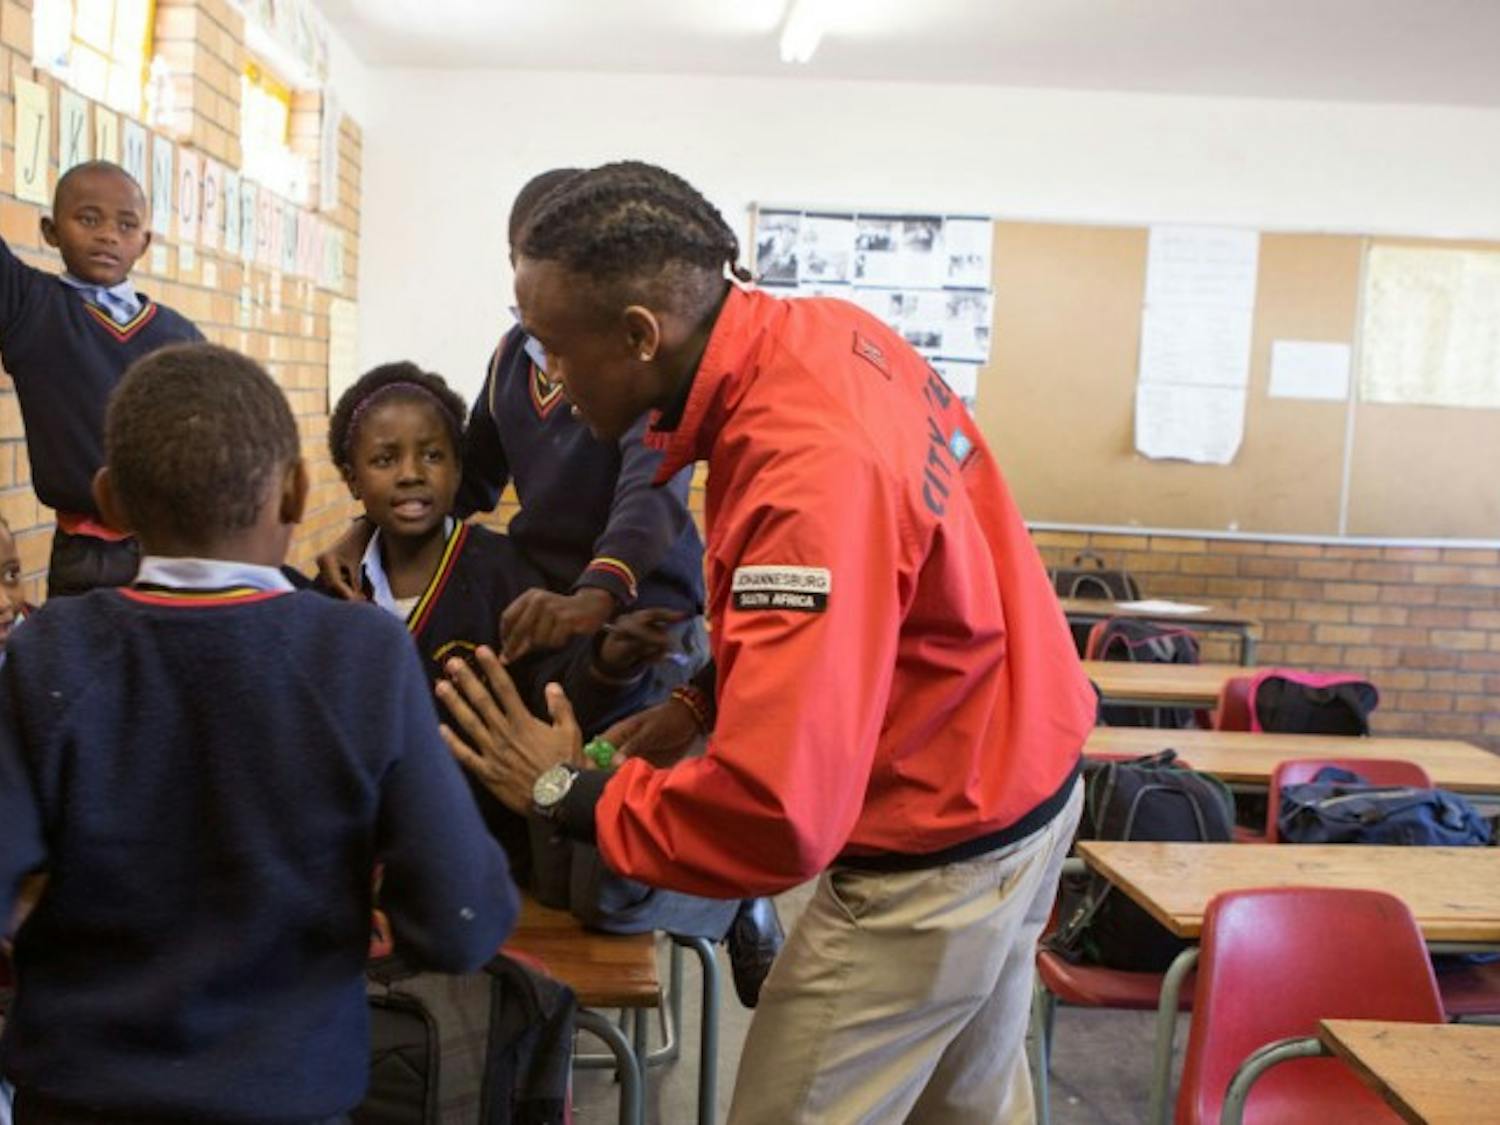 City Year members spend time with children supplementing after-school educational programs in the U.S. and abroad.